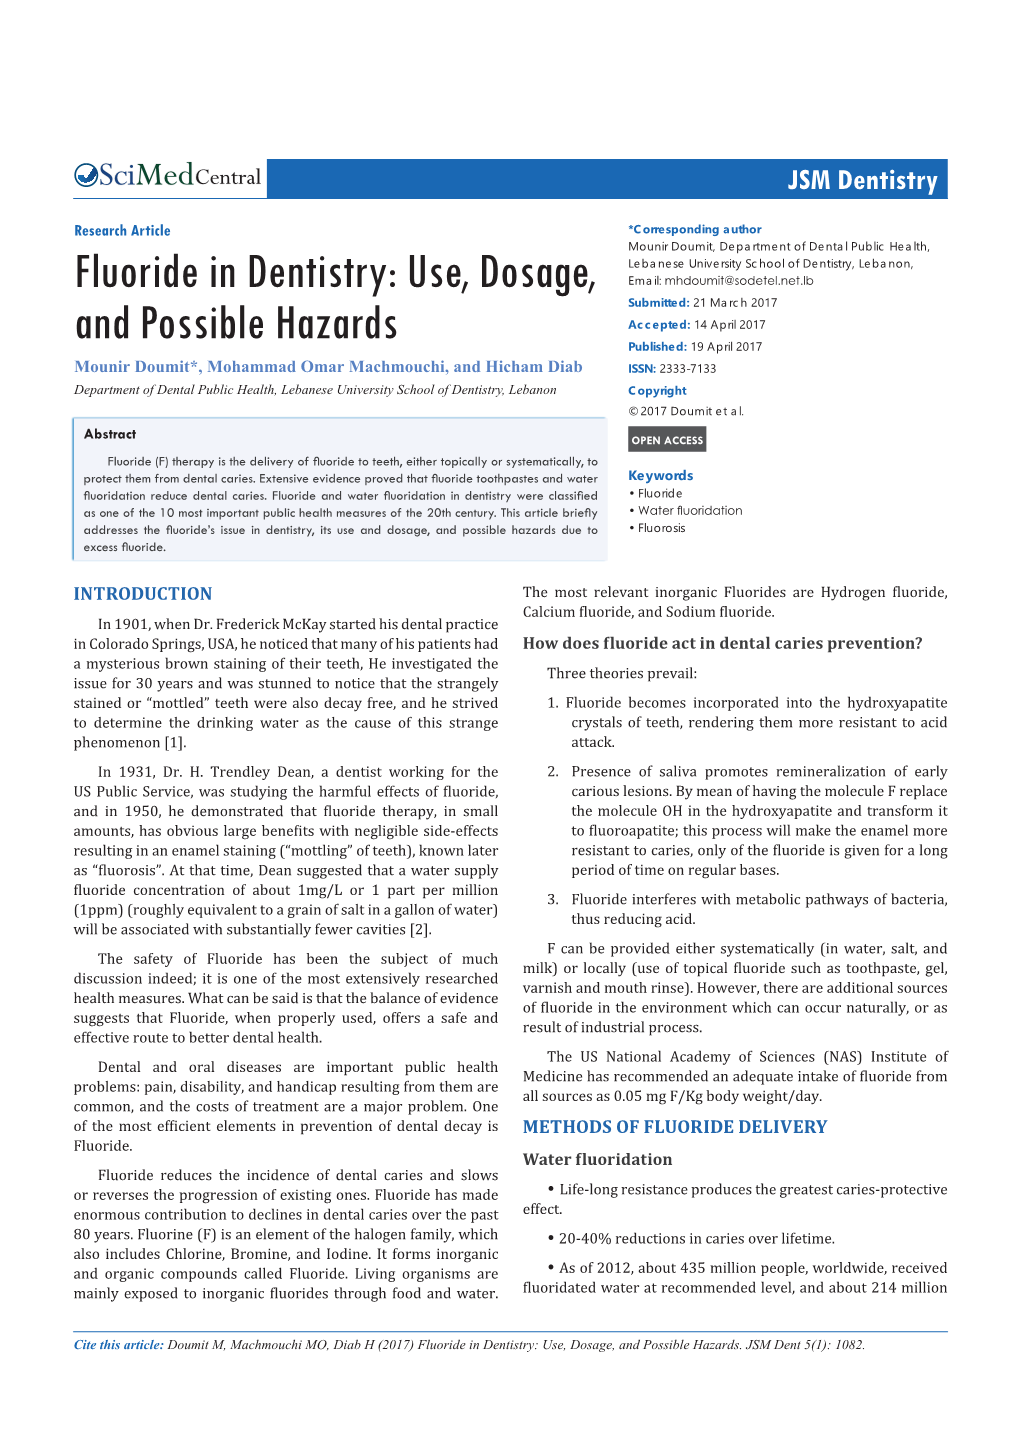 Fluoride in Dentistry: Use, Dosage, and Possible Hazards